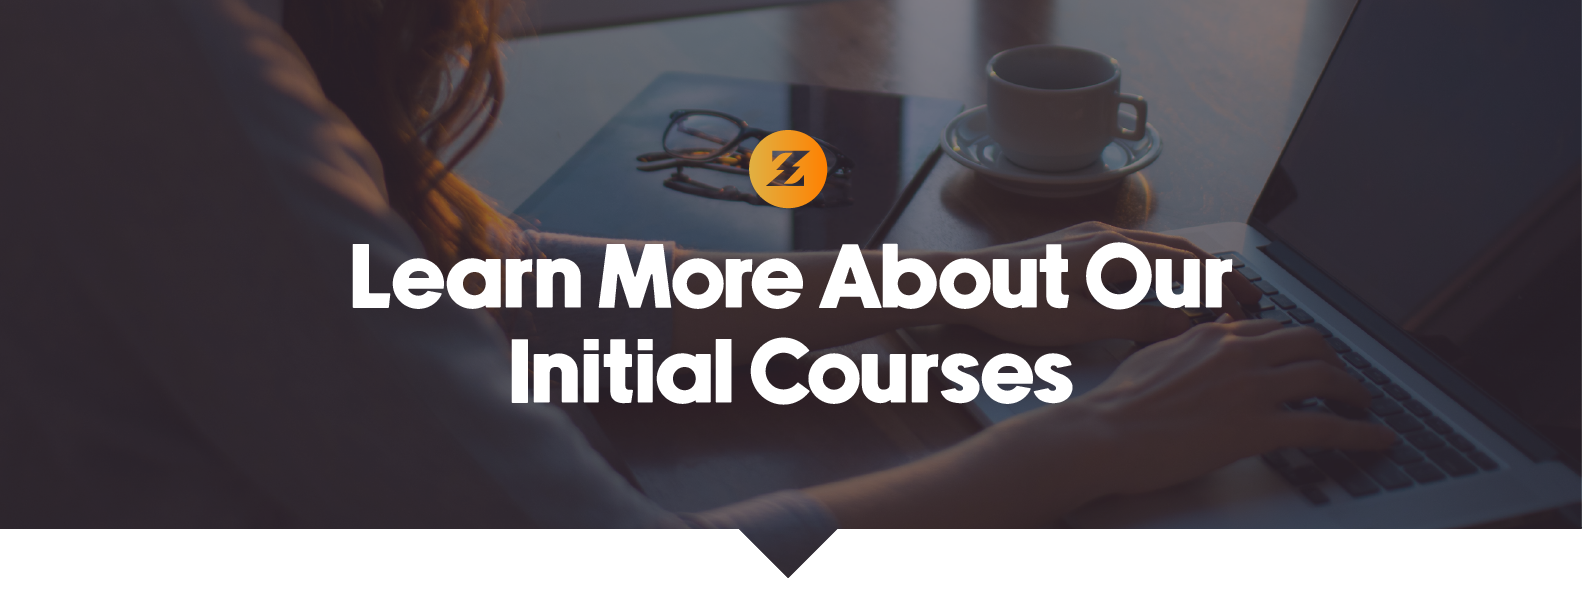 Zeus icon above text that reads "Learn More About Our Initial Course" on a dark background